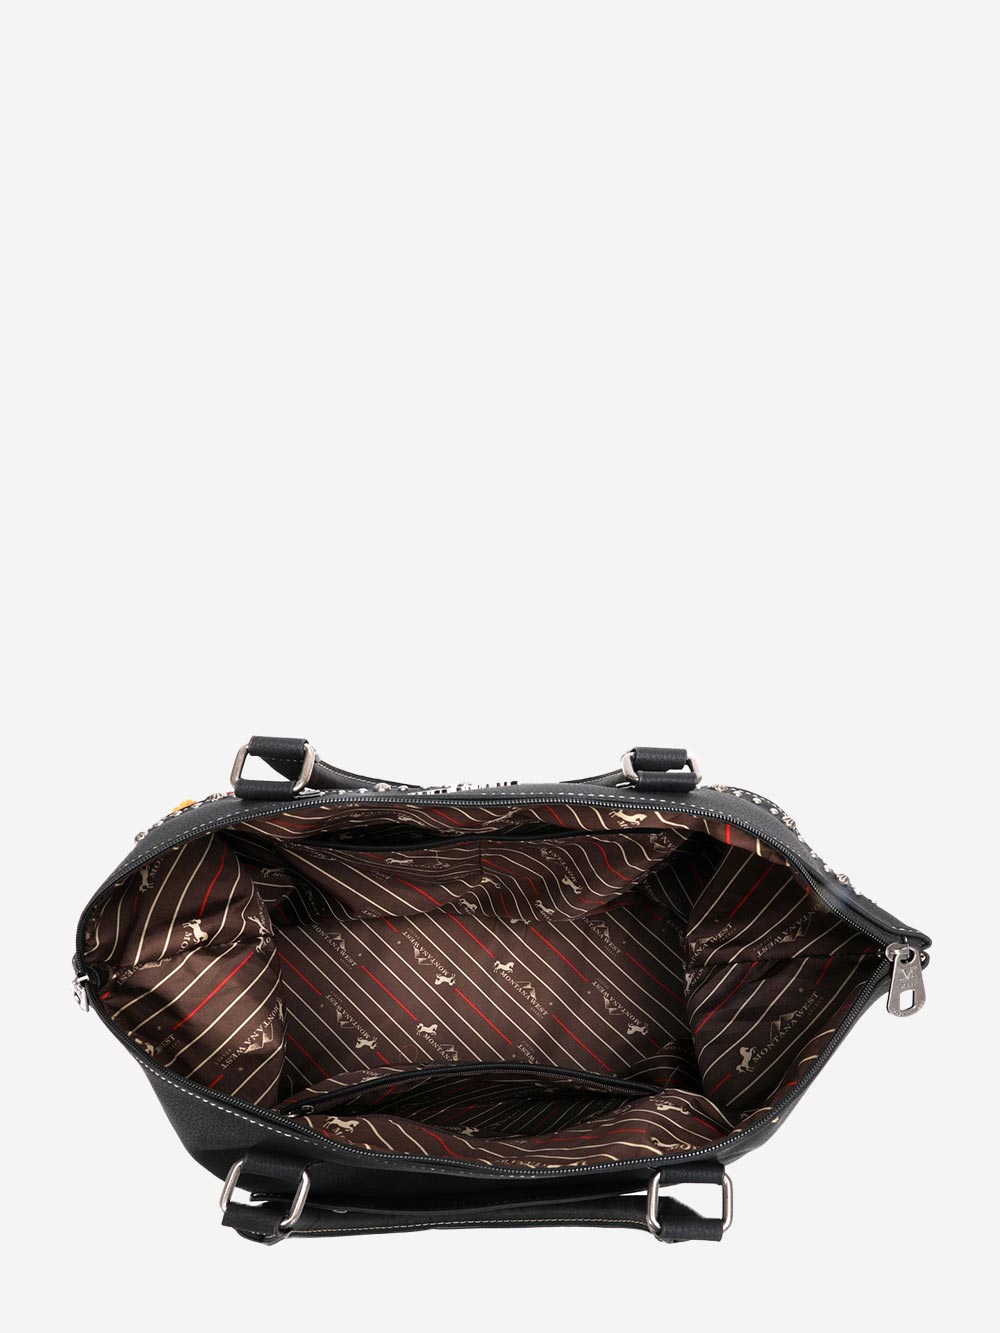 Montana West Aztec Tapestry Collection Weekender Bag - Montana West World